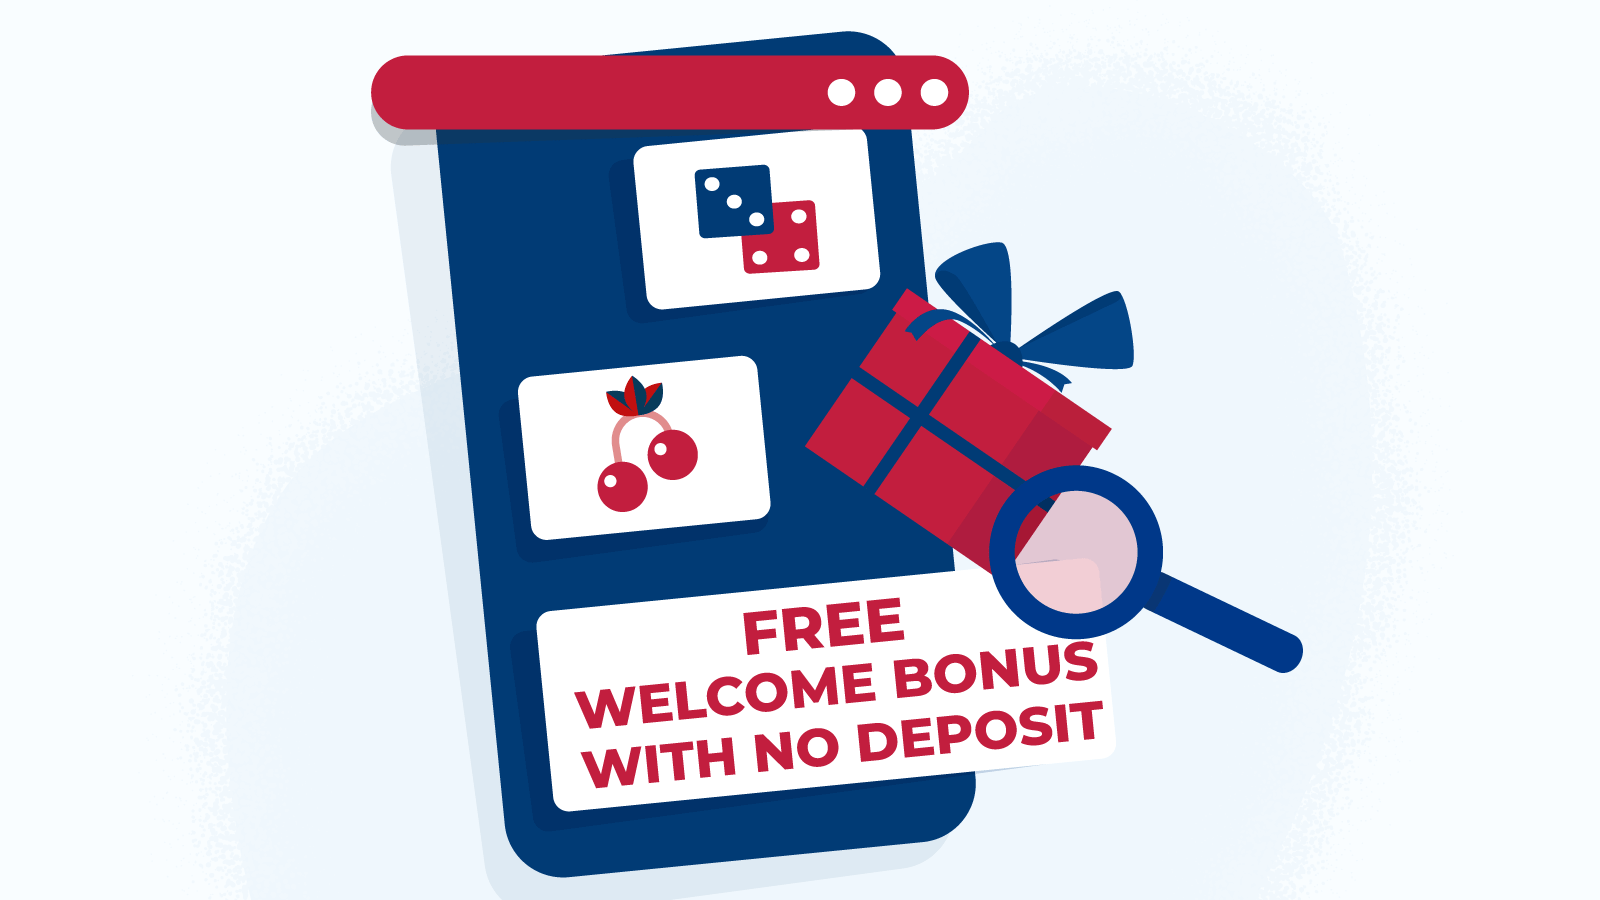 What Is a Free Welcome Bonus With No Deposit